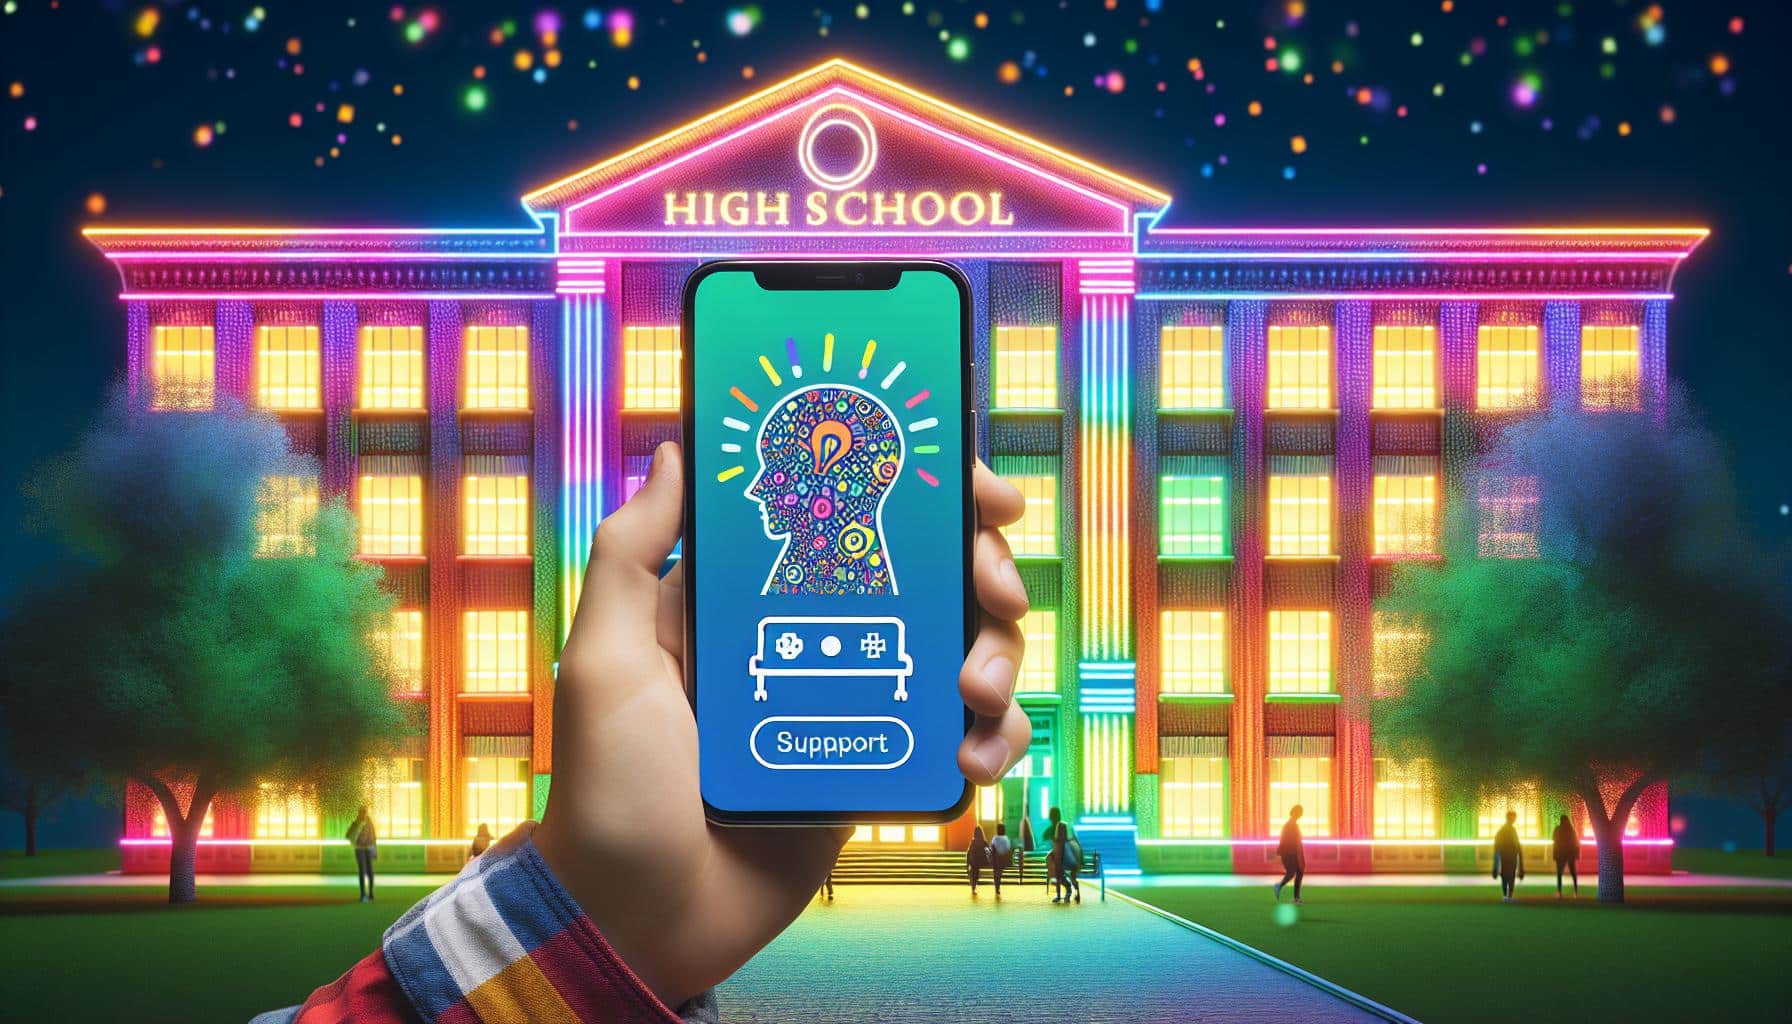 Allentown High Schools Utilize App to Connect Students with Mental Health Support | FinOracle